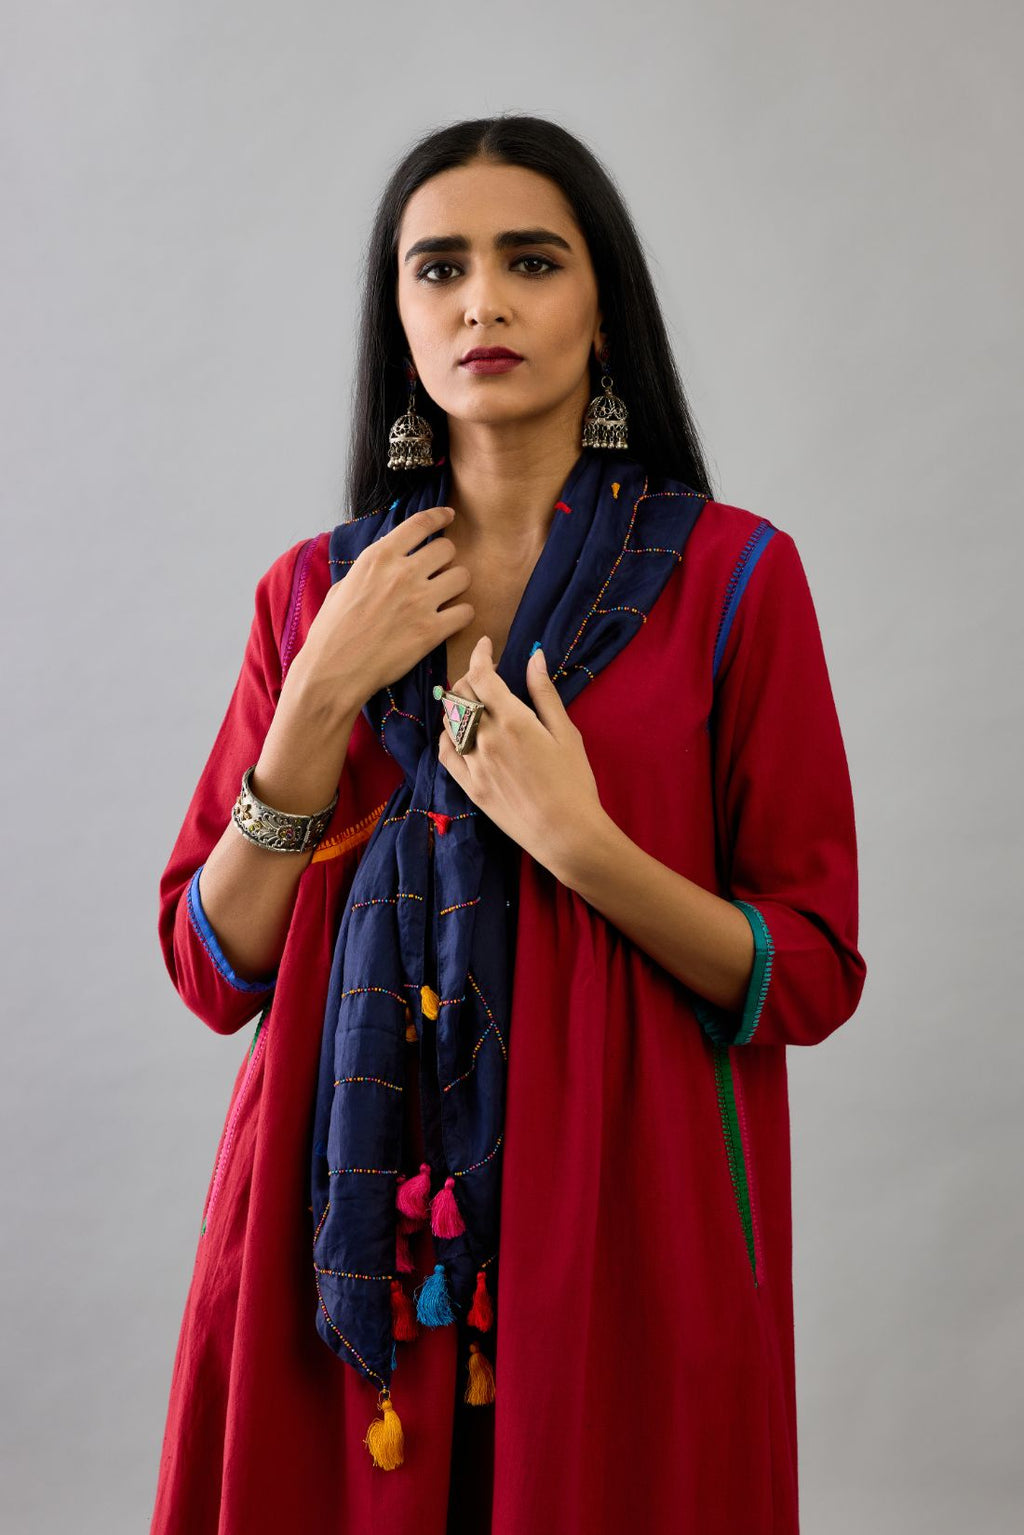 Red Handloom Cotton kurta set dress with multi colored silk facing and embroidery details.